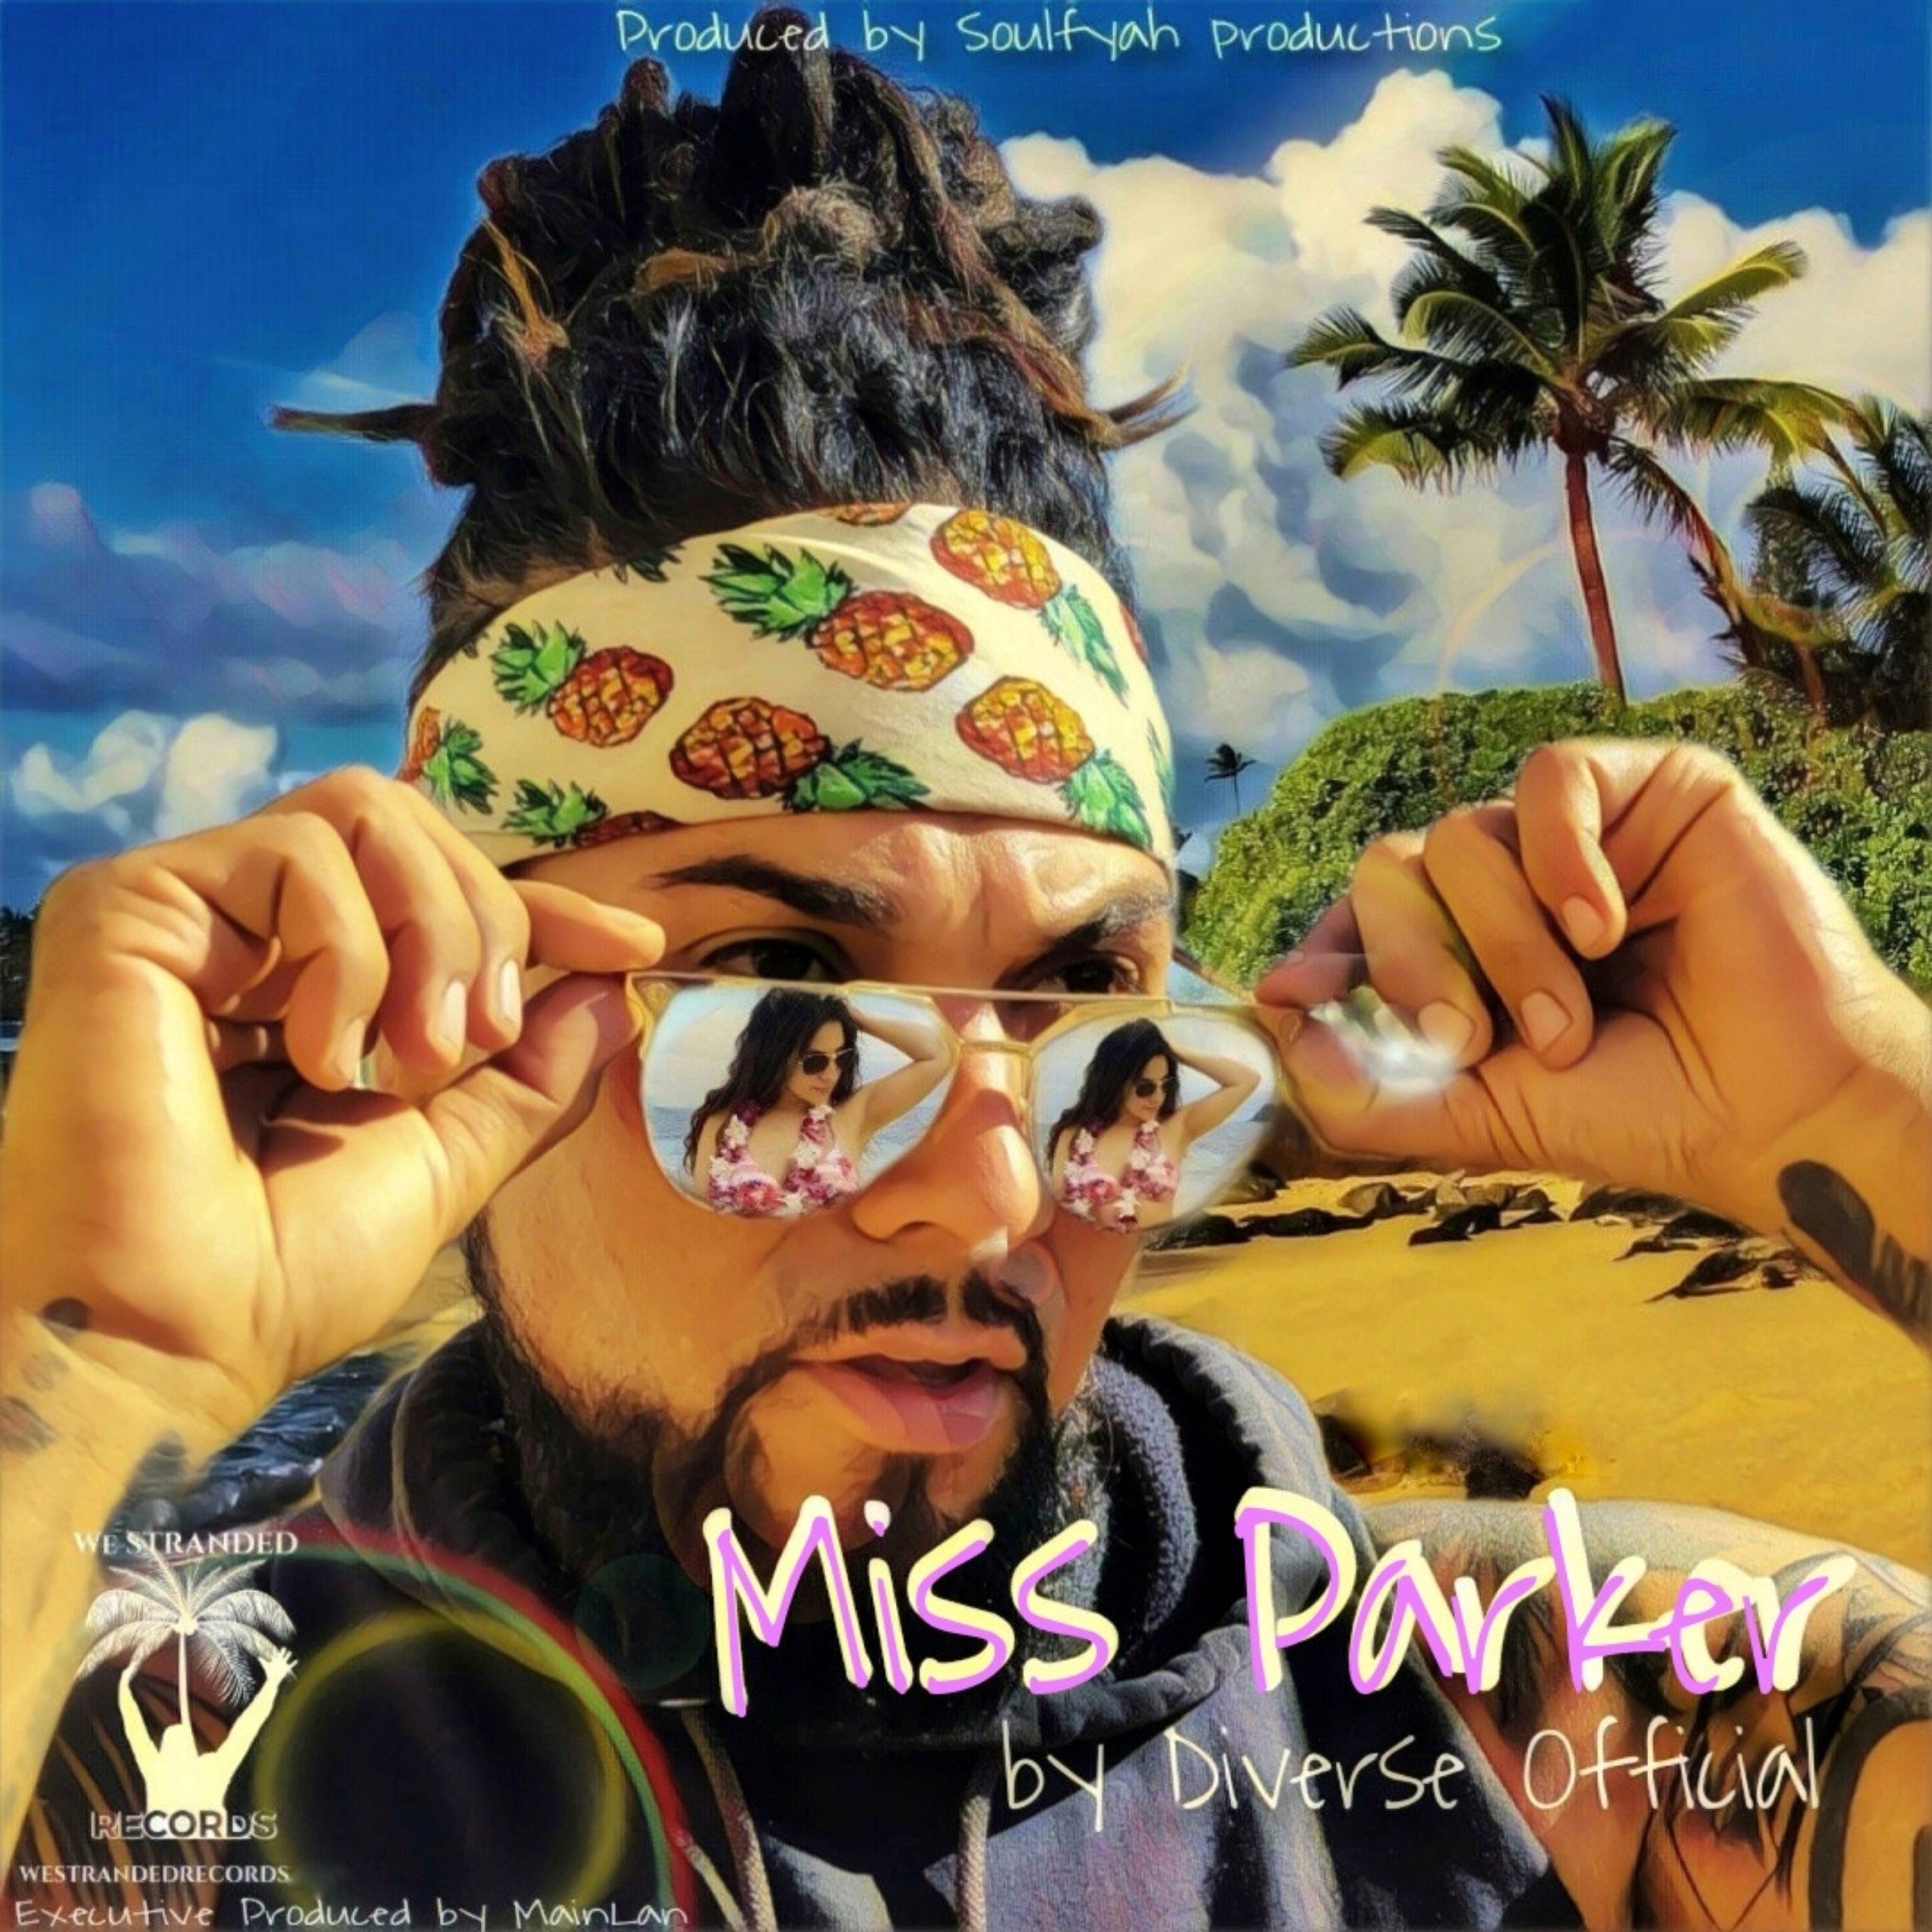 Art for Miss Parker by Diverse Official by Diverse Official